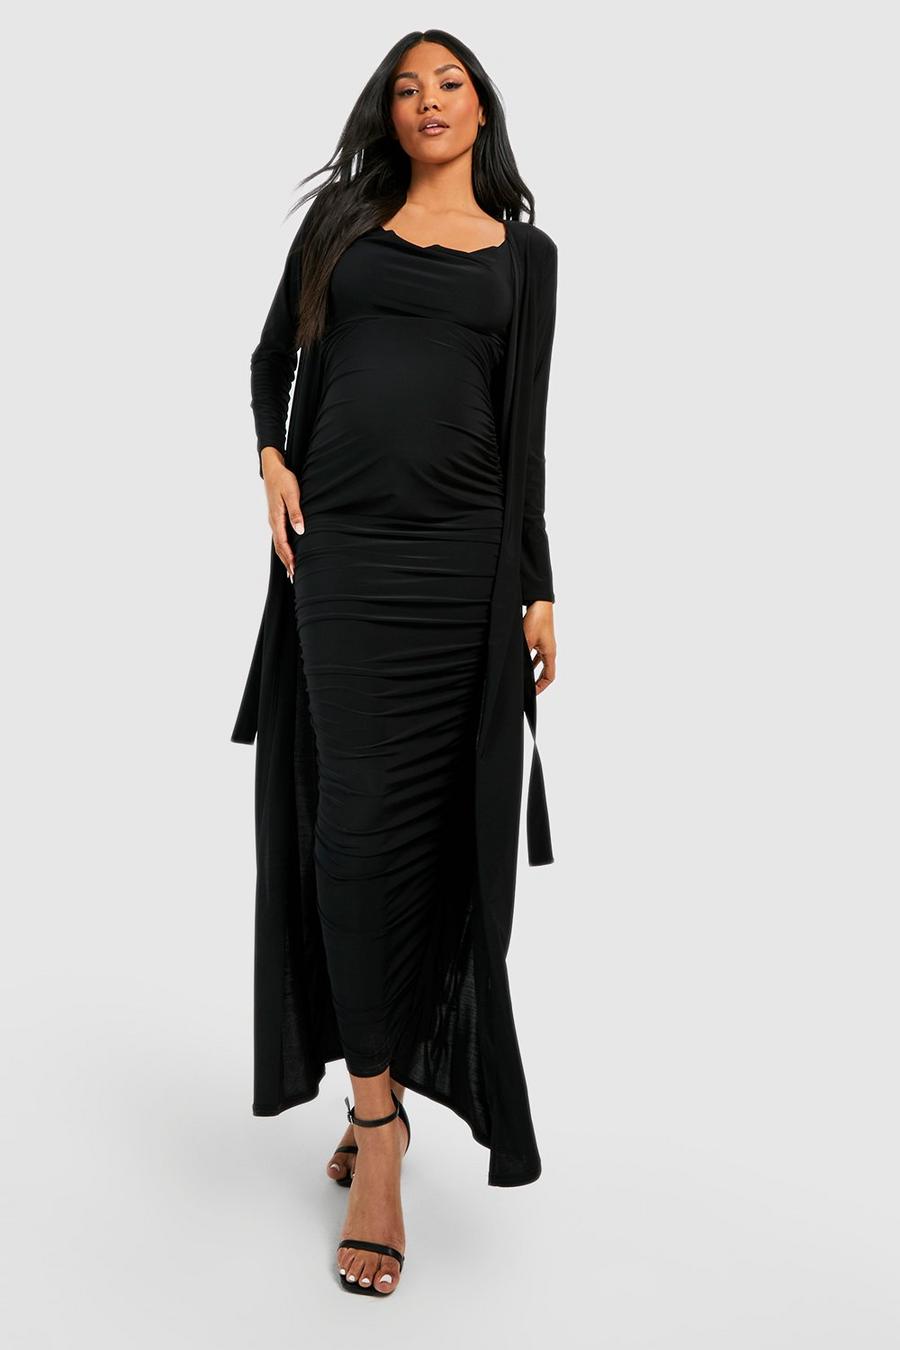 Black Maternity Maxi Strappy Cowl Dress And Duster Coat